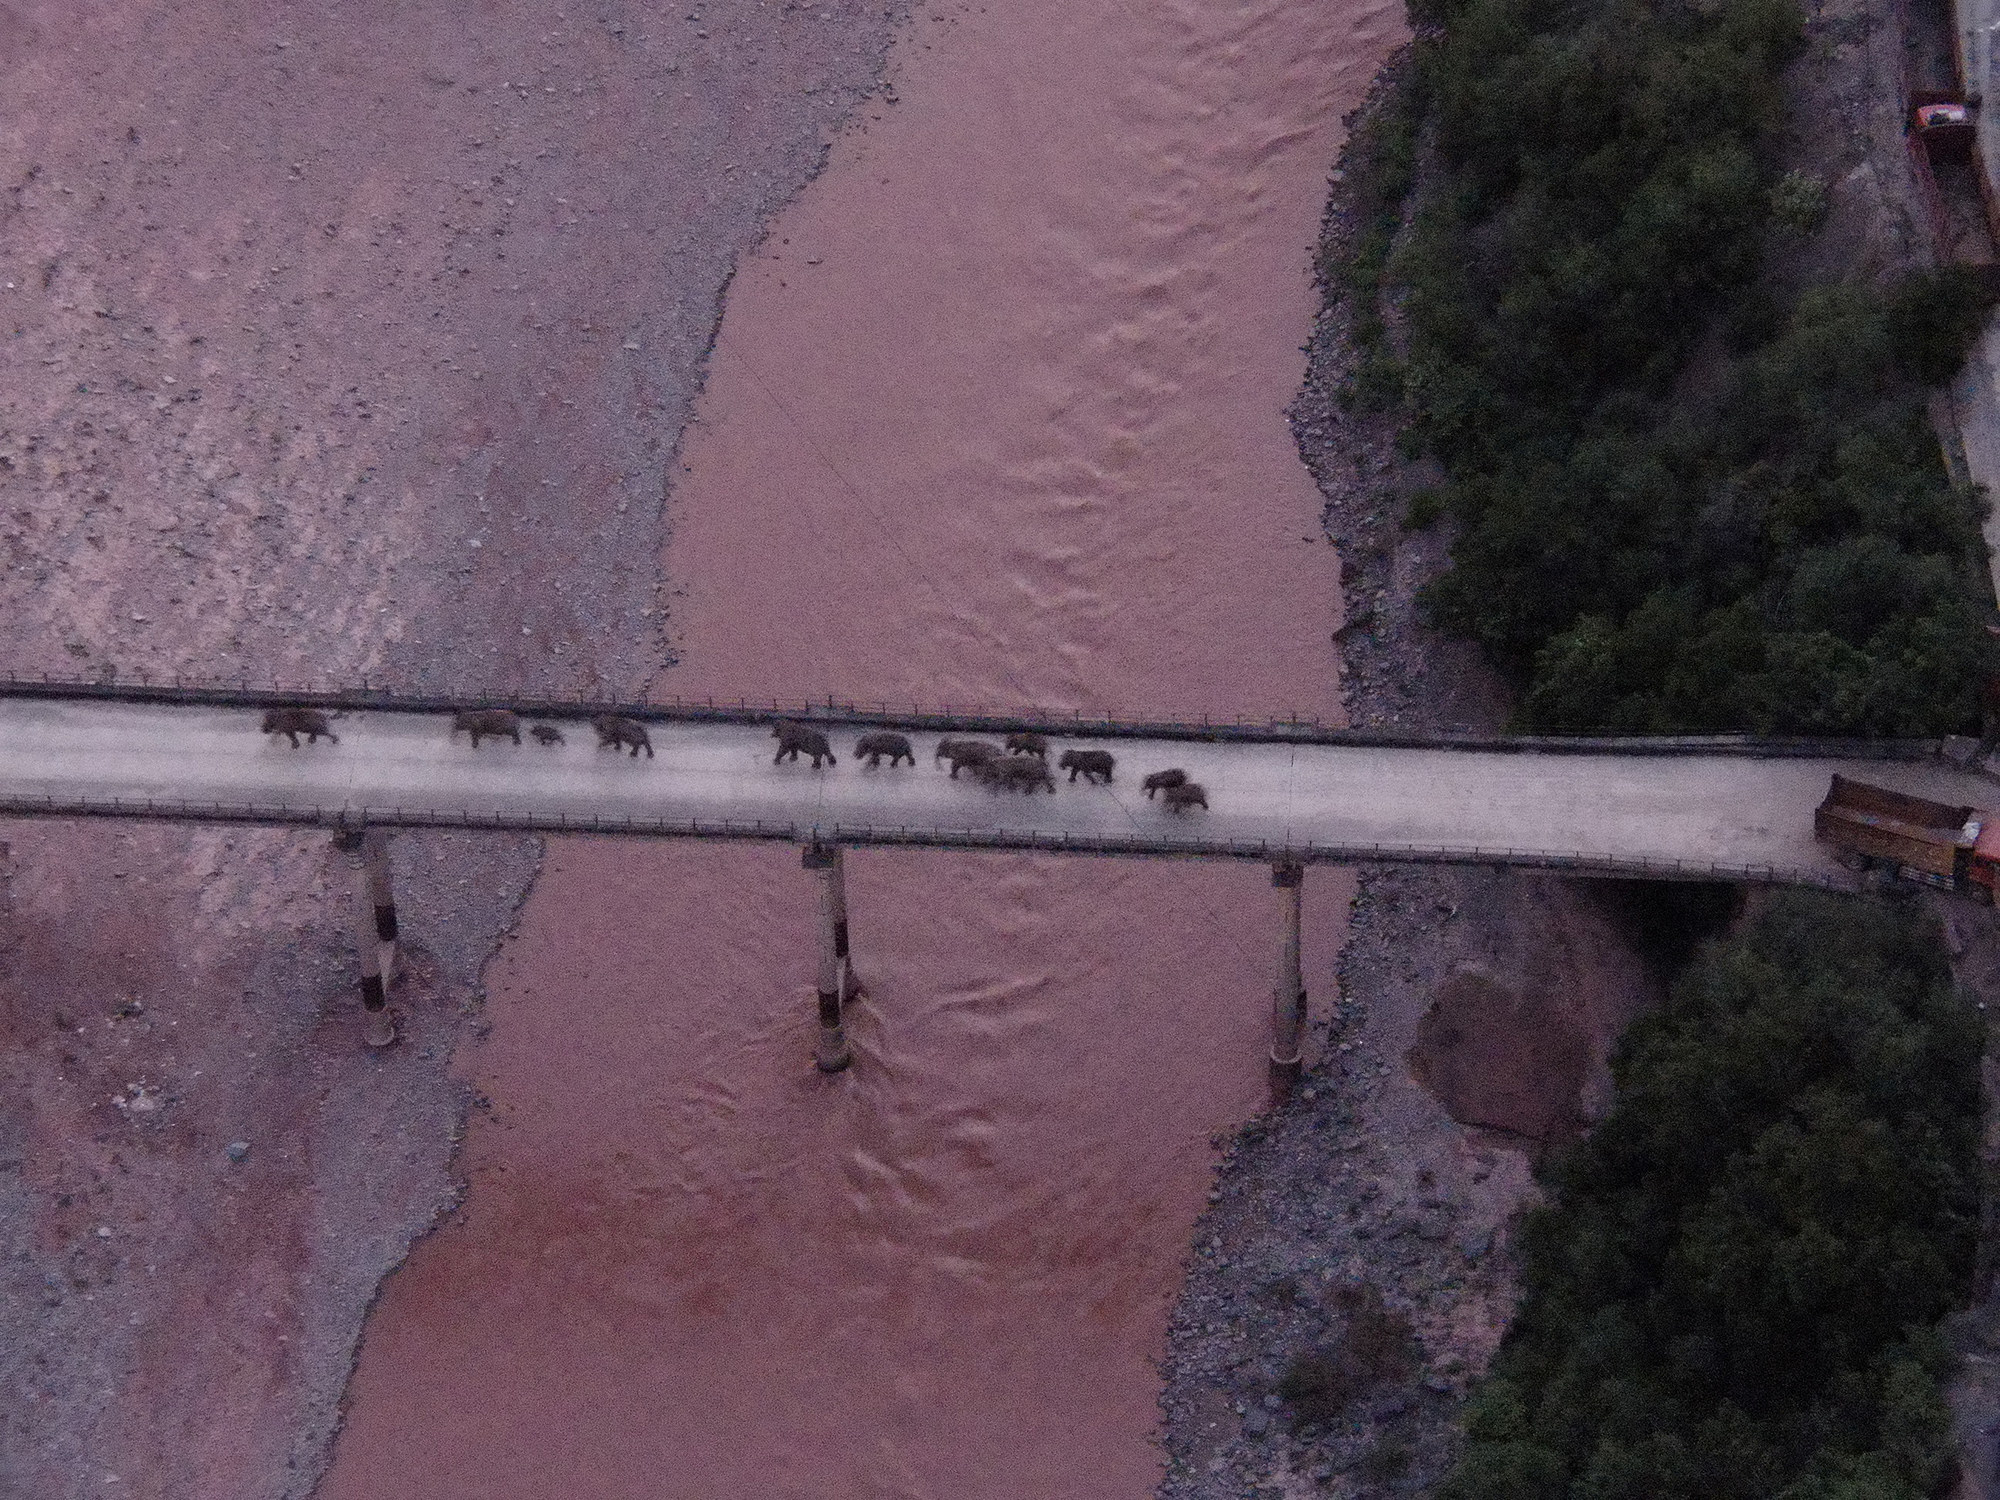 An aerial view shows the herd crossing a bridge over a river